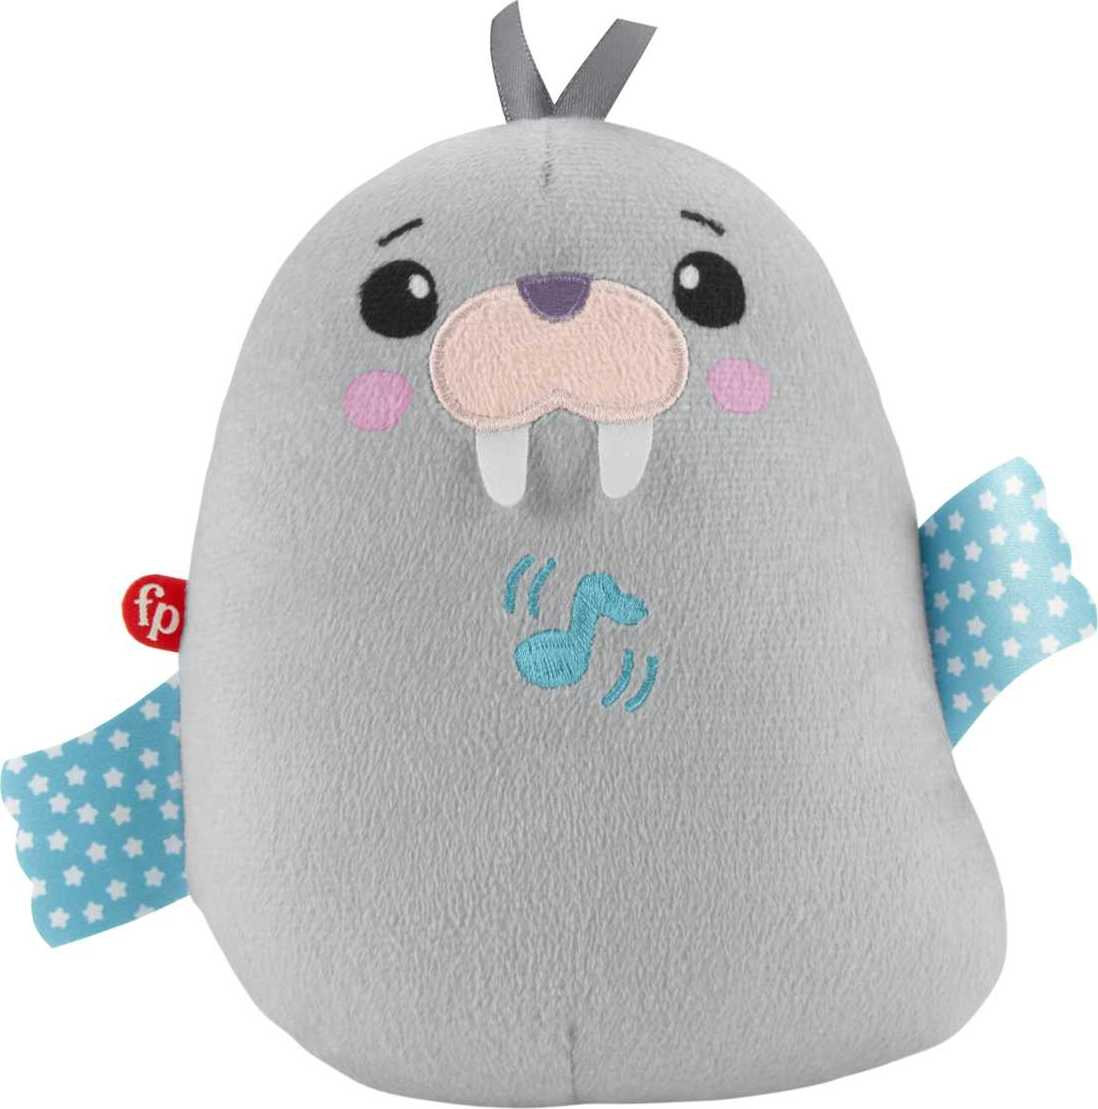 Fisher-Price Chill Vibes Walrus Soother Newborn Sound Machine Plush Baby Toy with Music - image 1 of 8